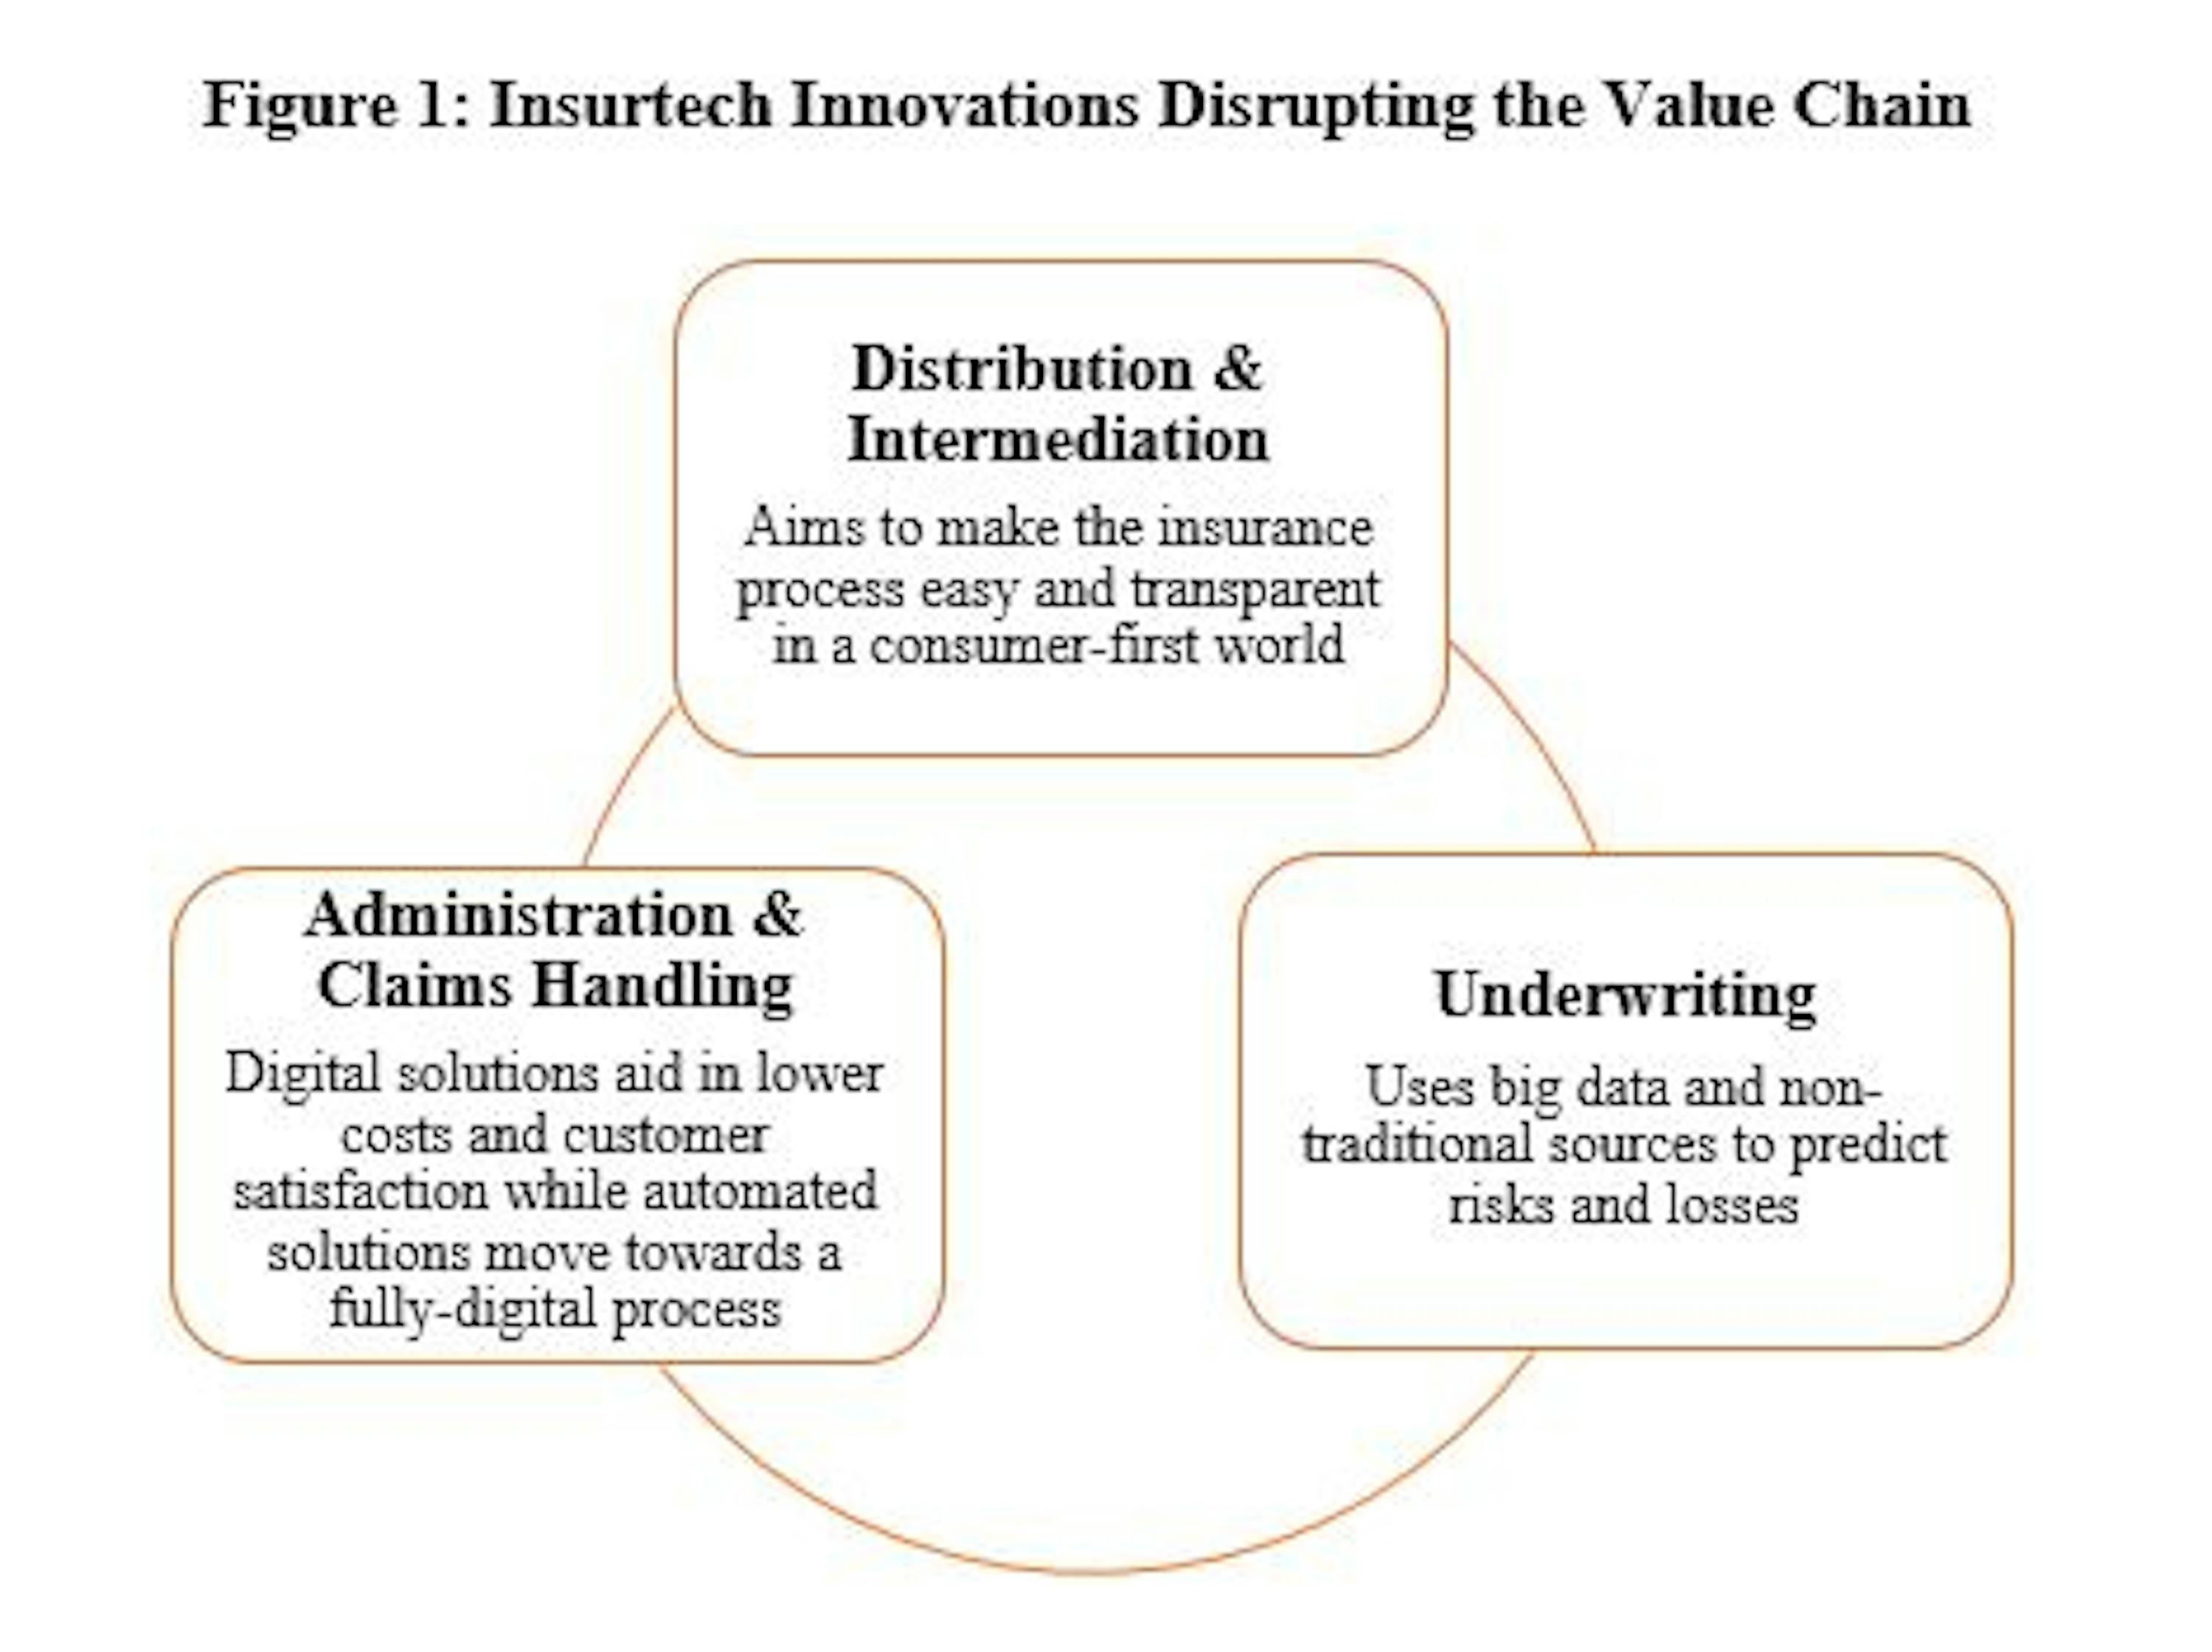 Overview of Insurtech & Its Impact on the Insurance Industry